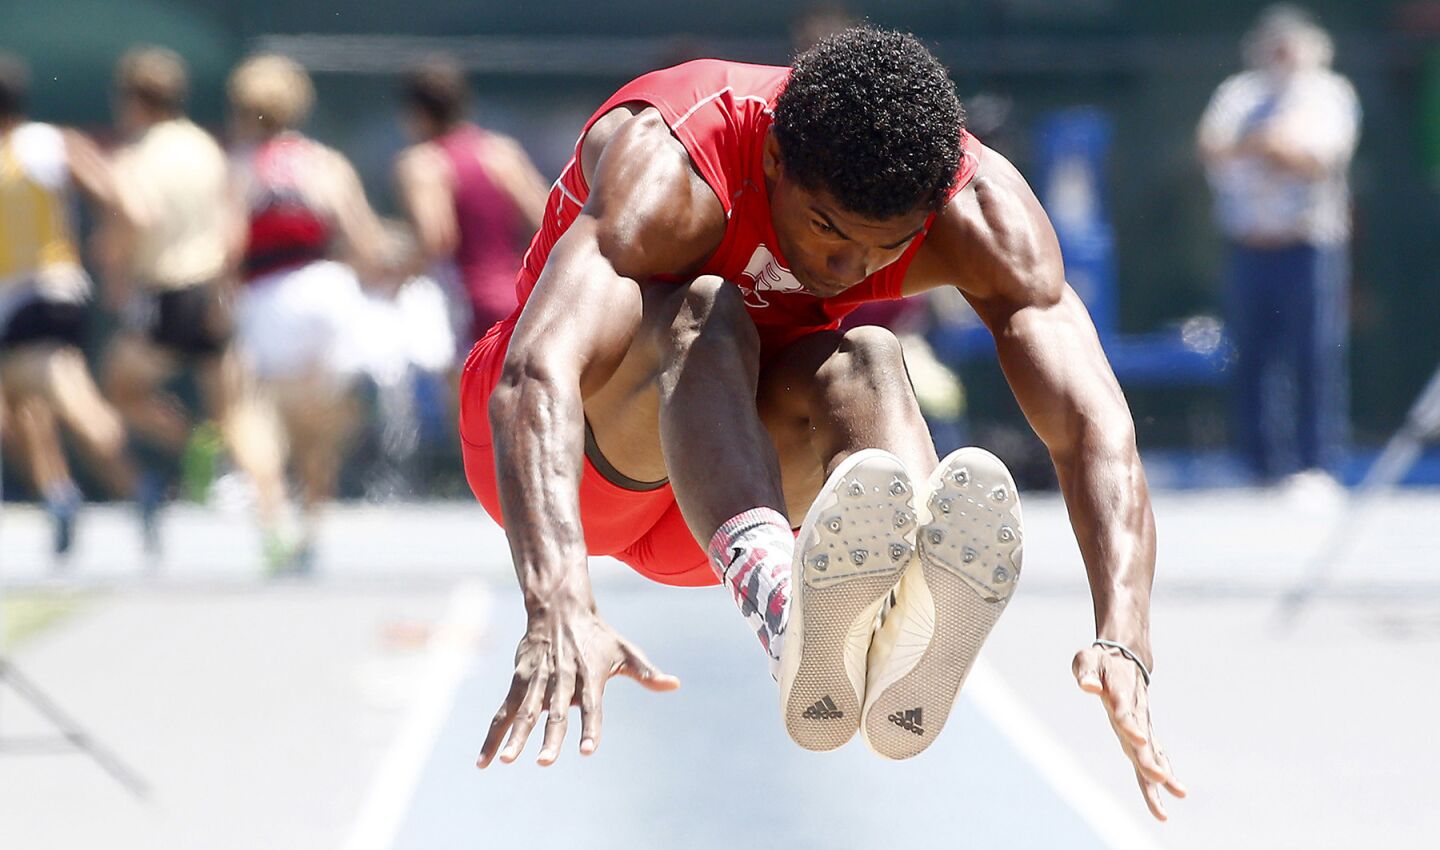 Rancho Verde's Bryan Thompson comepetes in the Division 1 boys' long jump during the CIF Southern Section finals at Cerritos College.